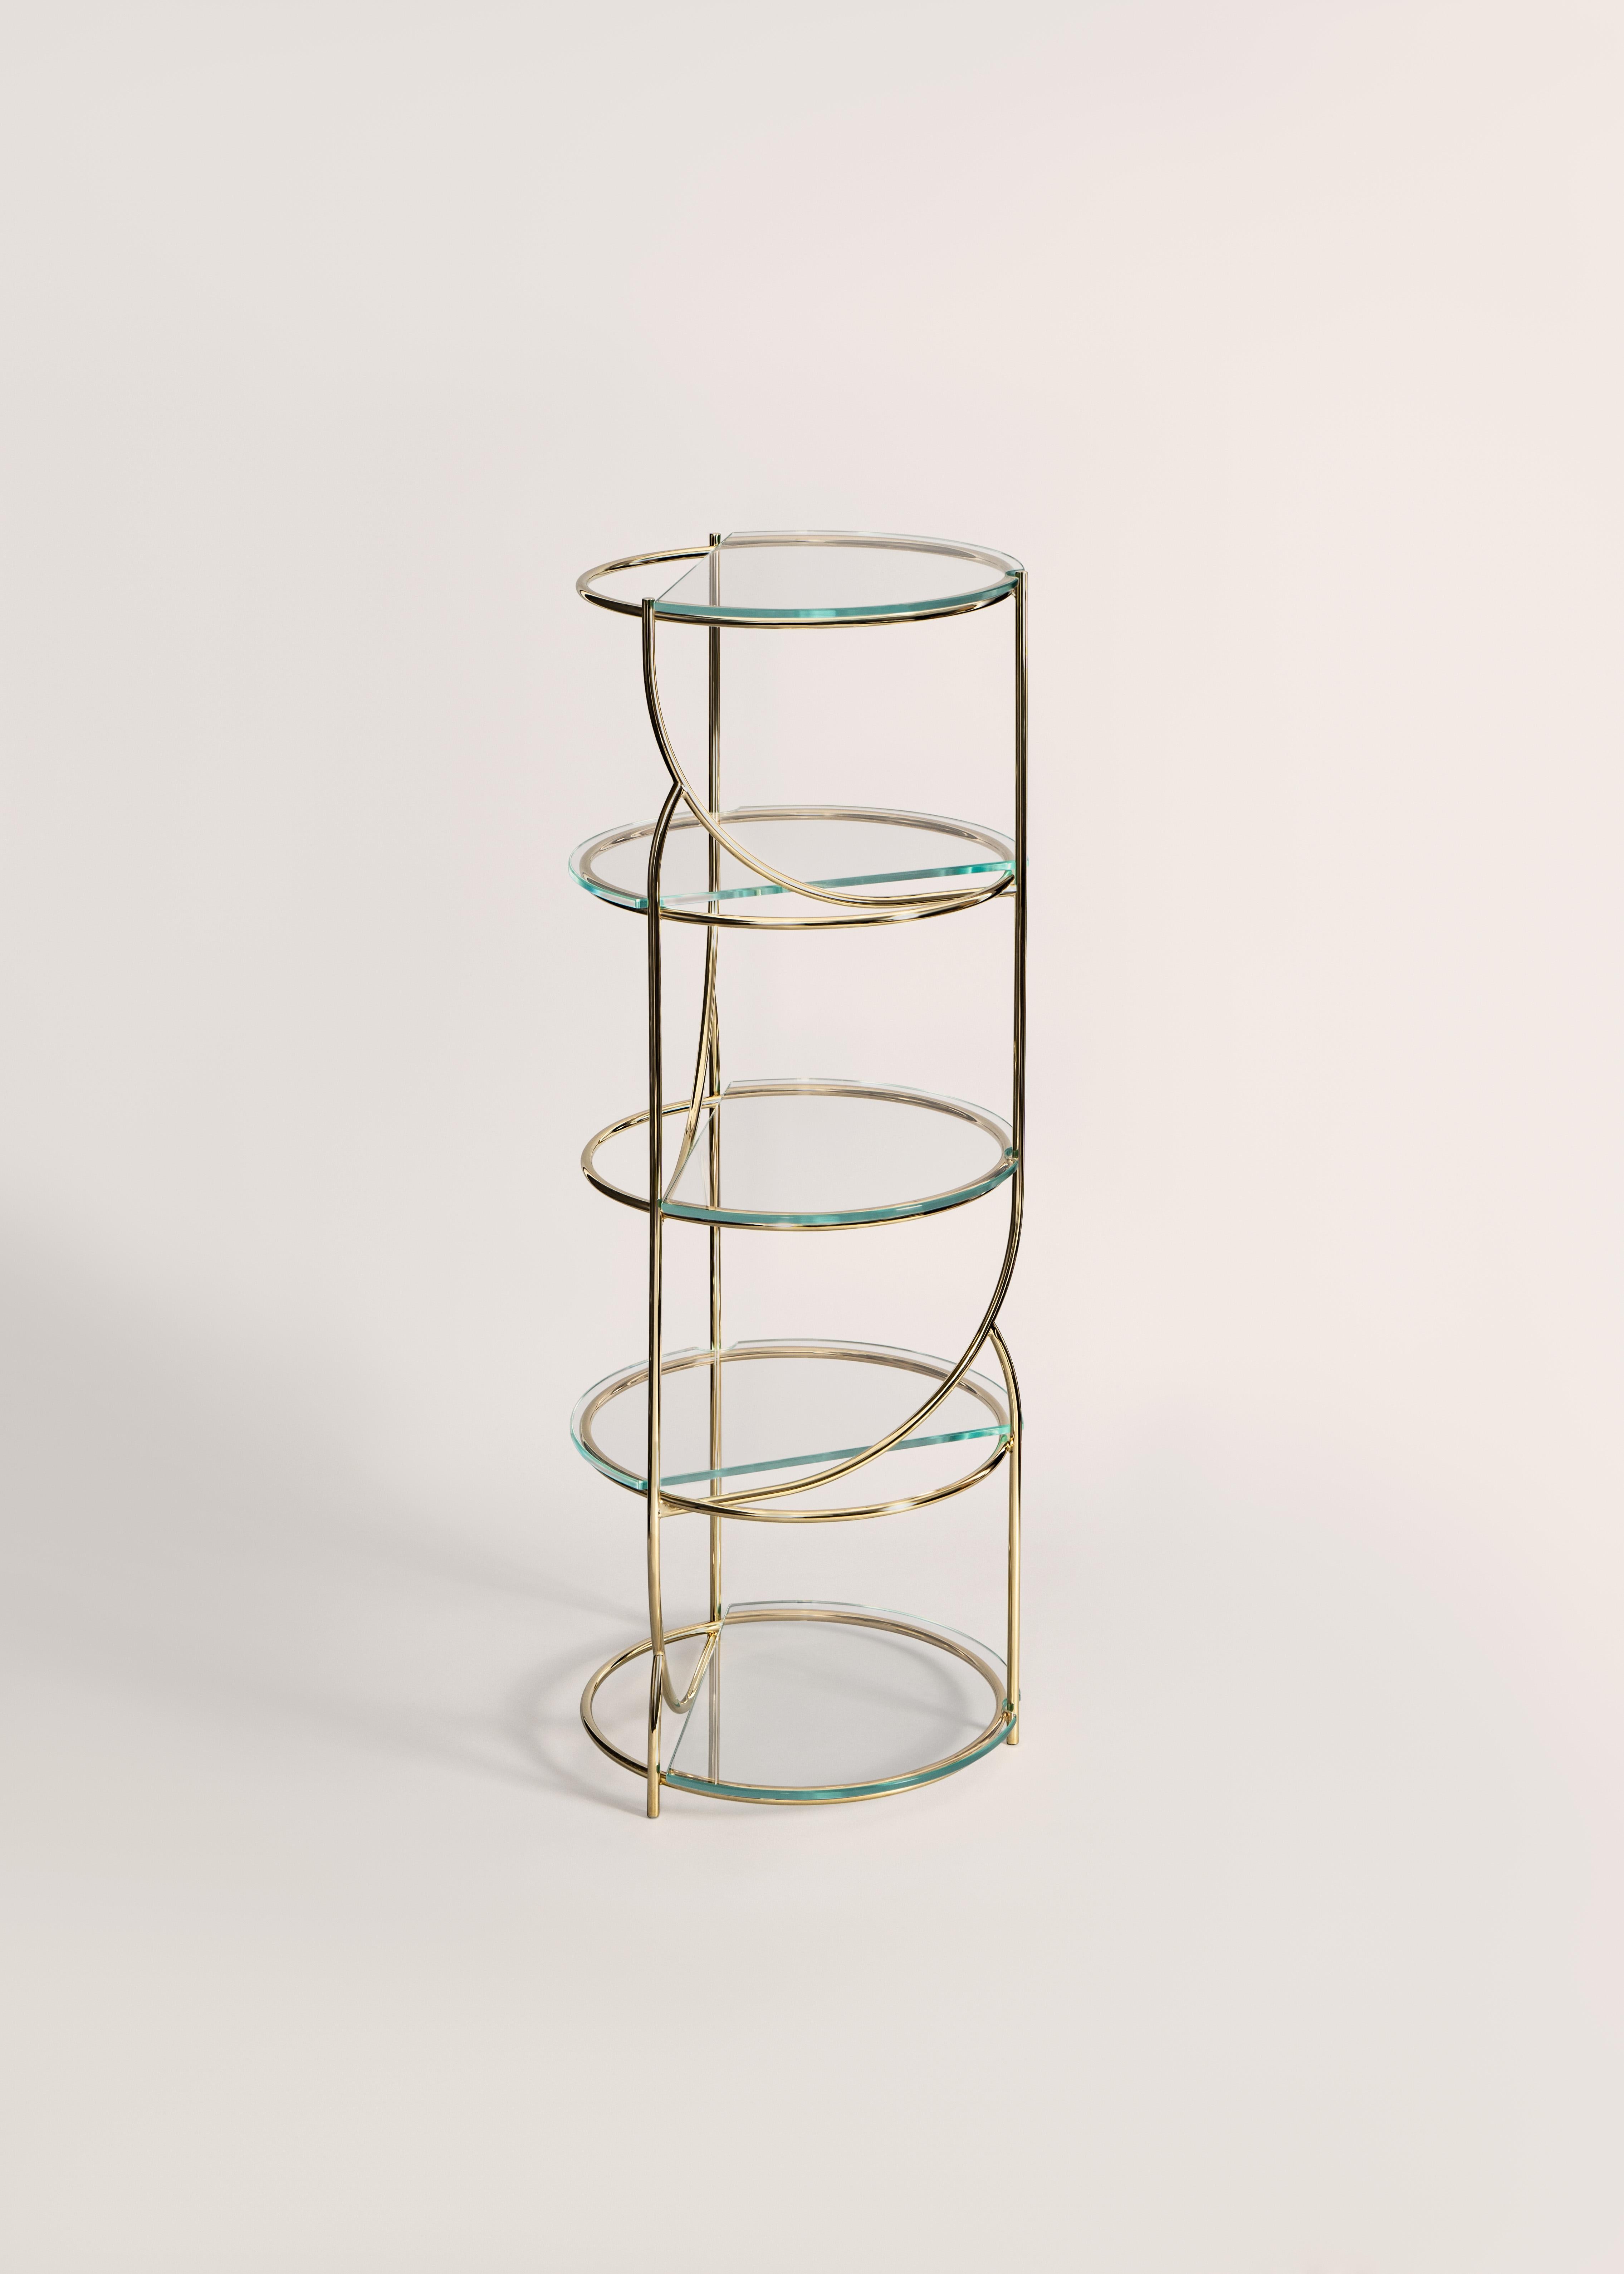 Galvanized Cosettina Gold, repositionable glass shelves made in Italy by Enrico Girotti For Sale